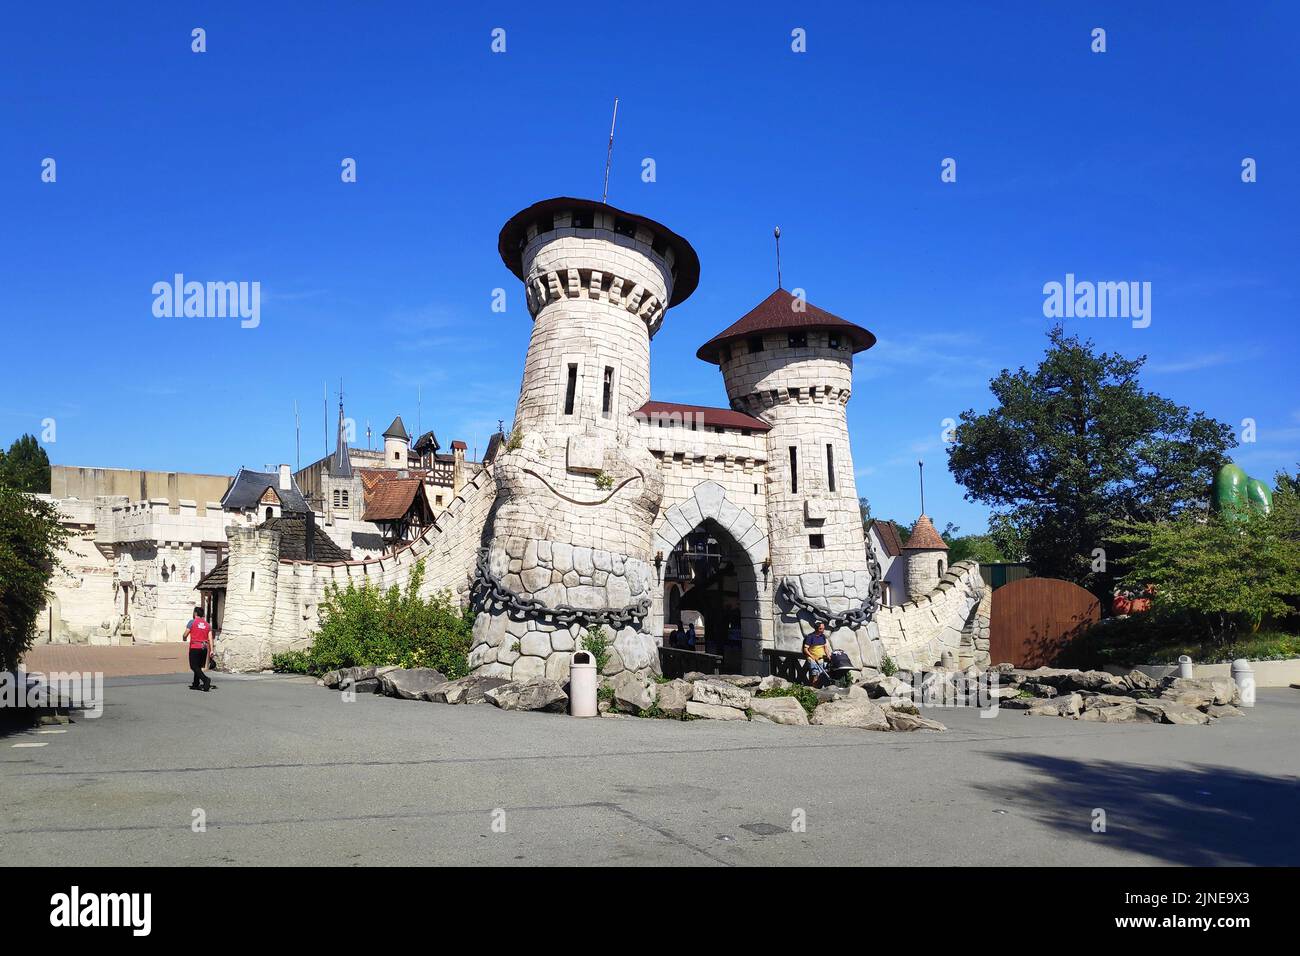 Plailly, France - August 10 2022: The Smiling castle towers making the entrance of the 'À travers le temps' zone inside the Parc Astérix, a theme park Stock Photo